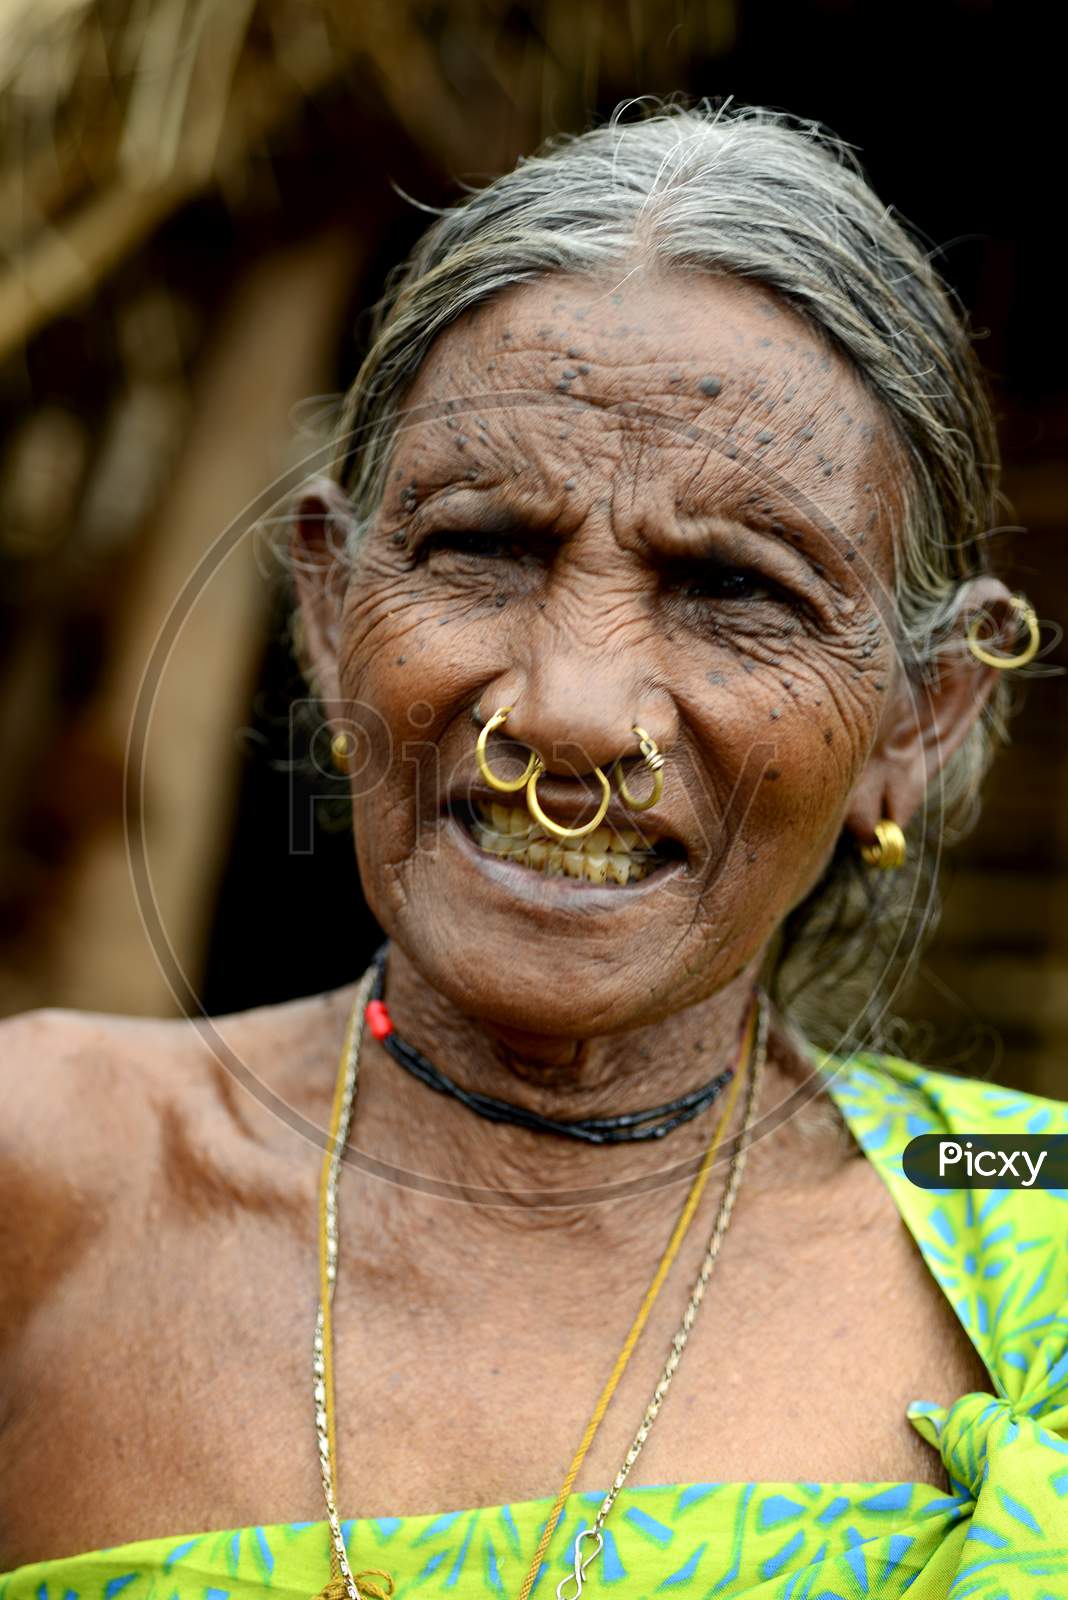 Image of Indian Old Tribal Woman's face-IK340481-Picxy